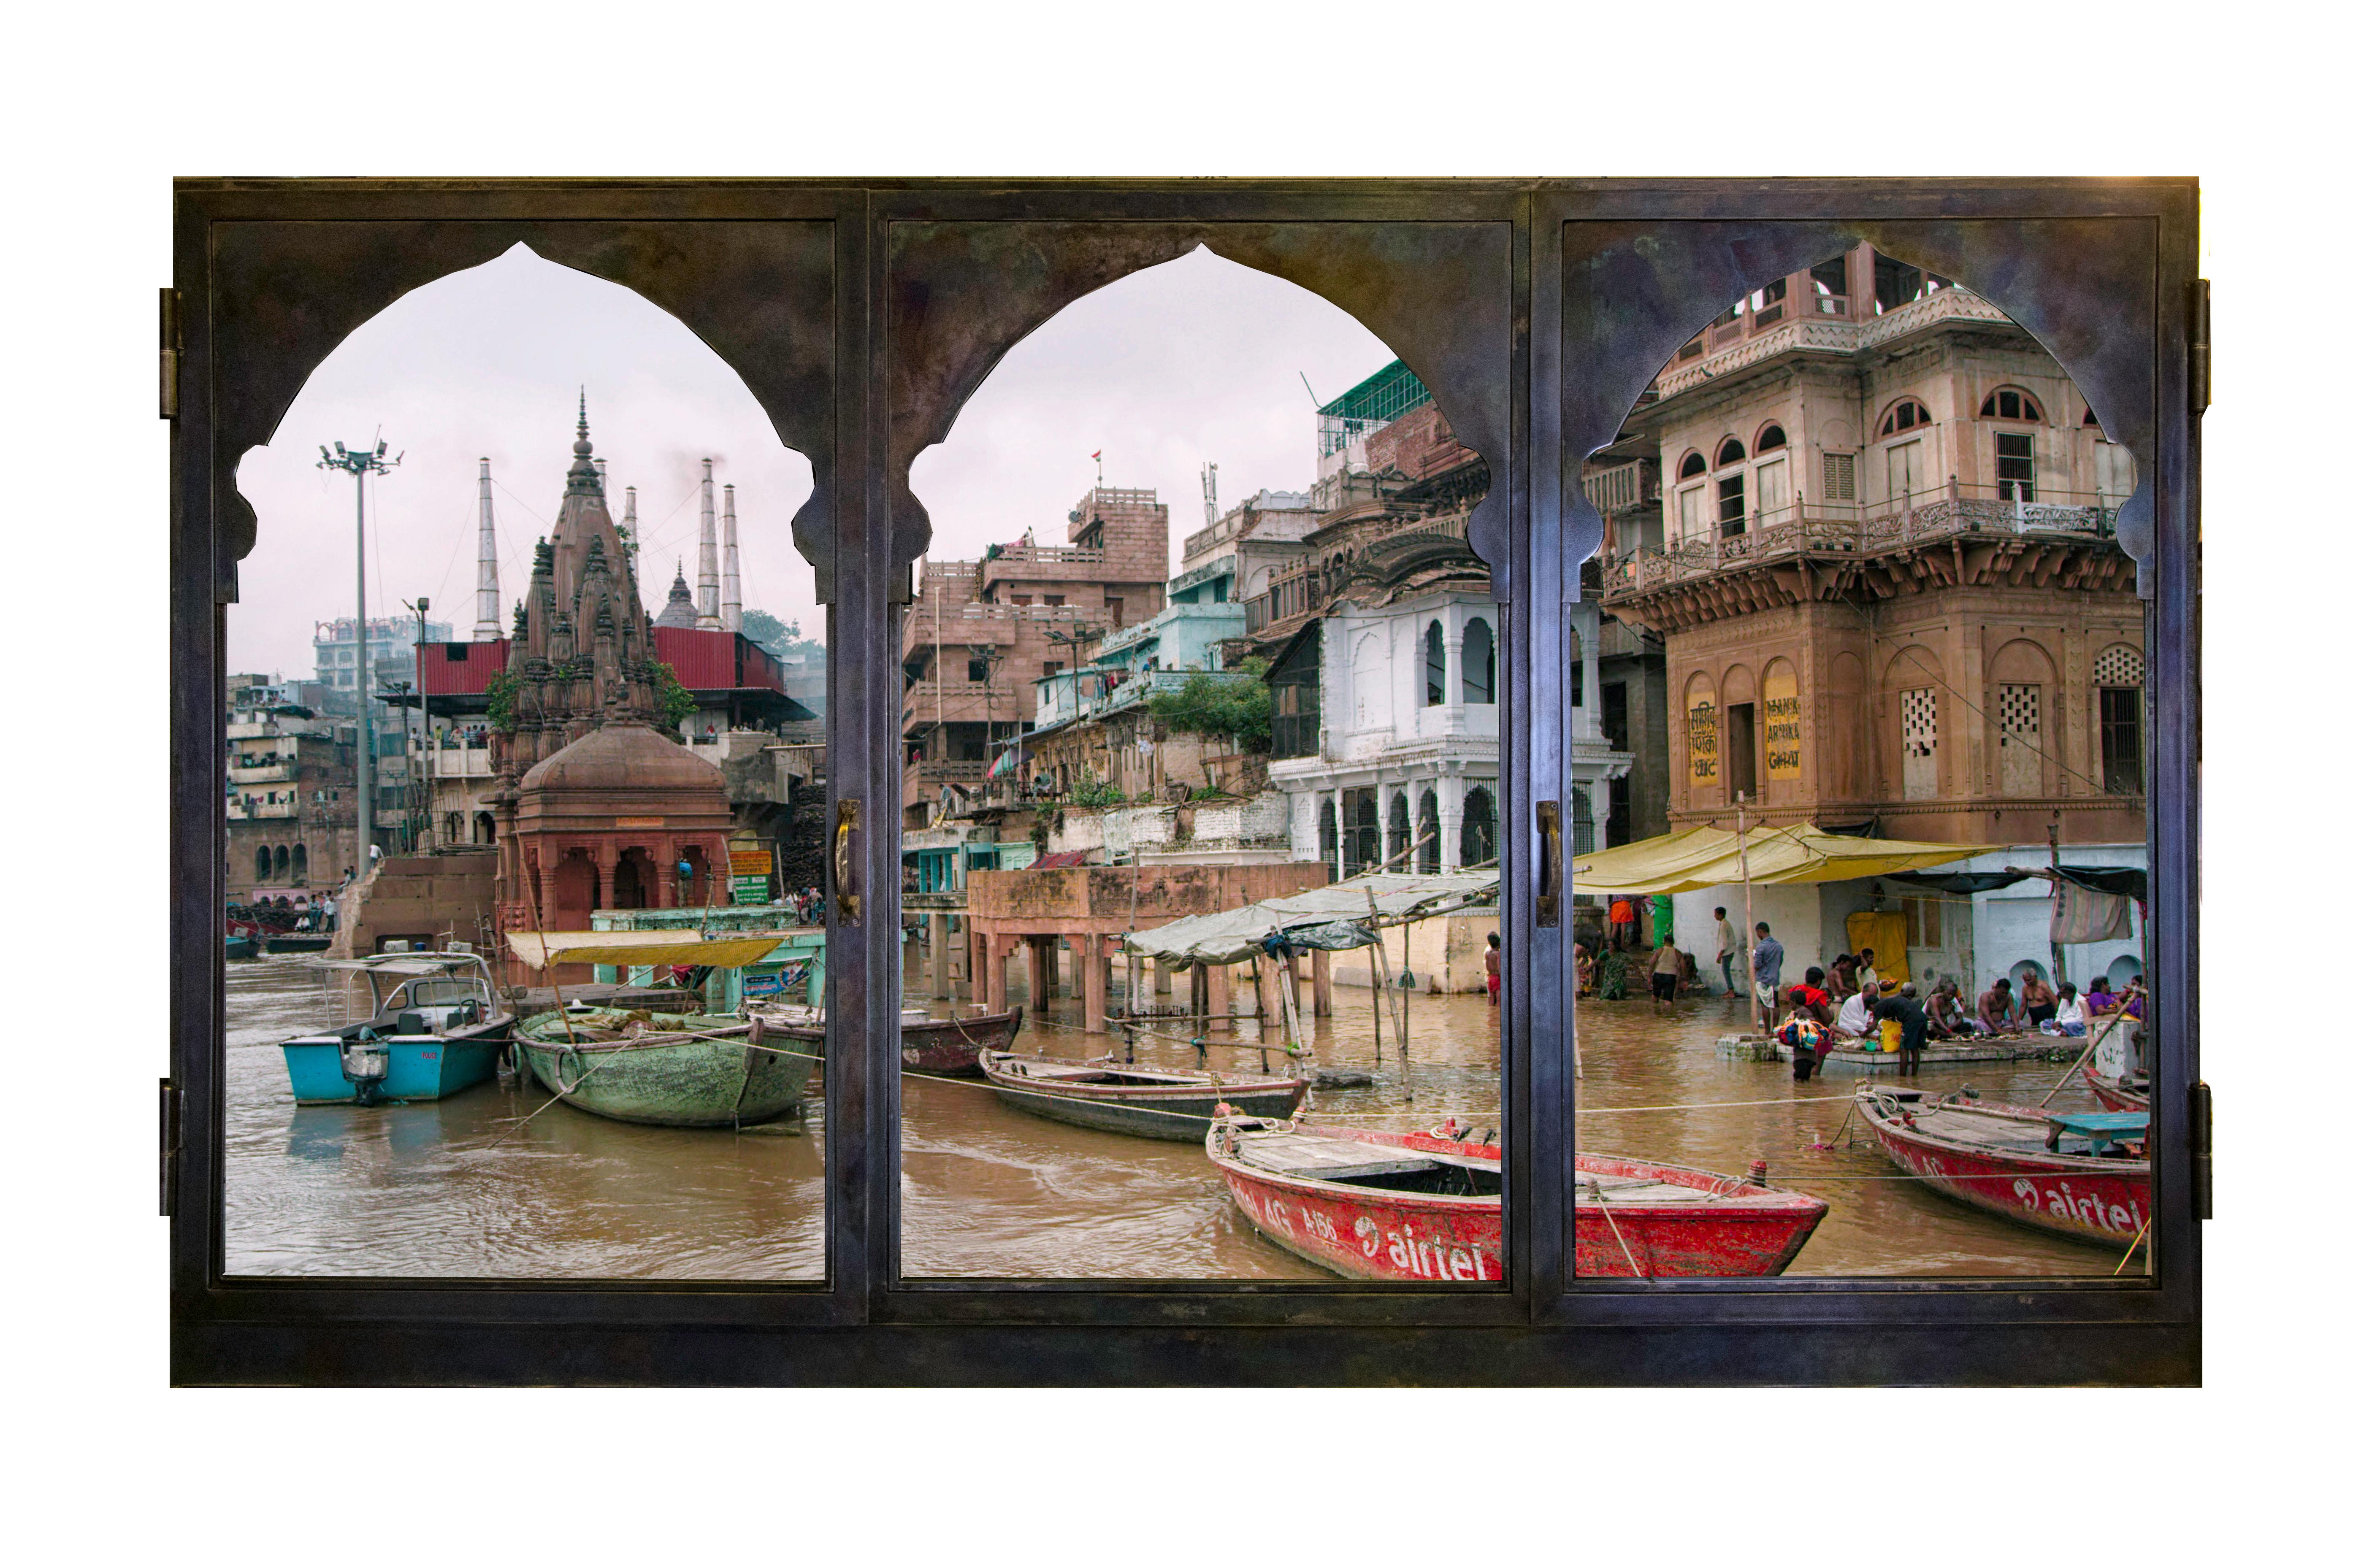 Italian Anotherview n.14 On the Ganges During Monsoon For Sale